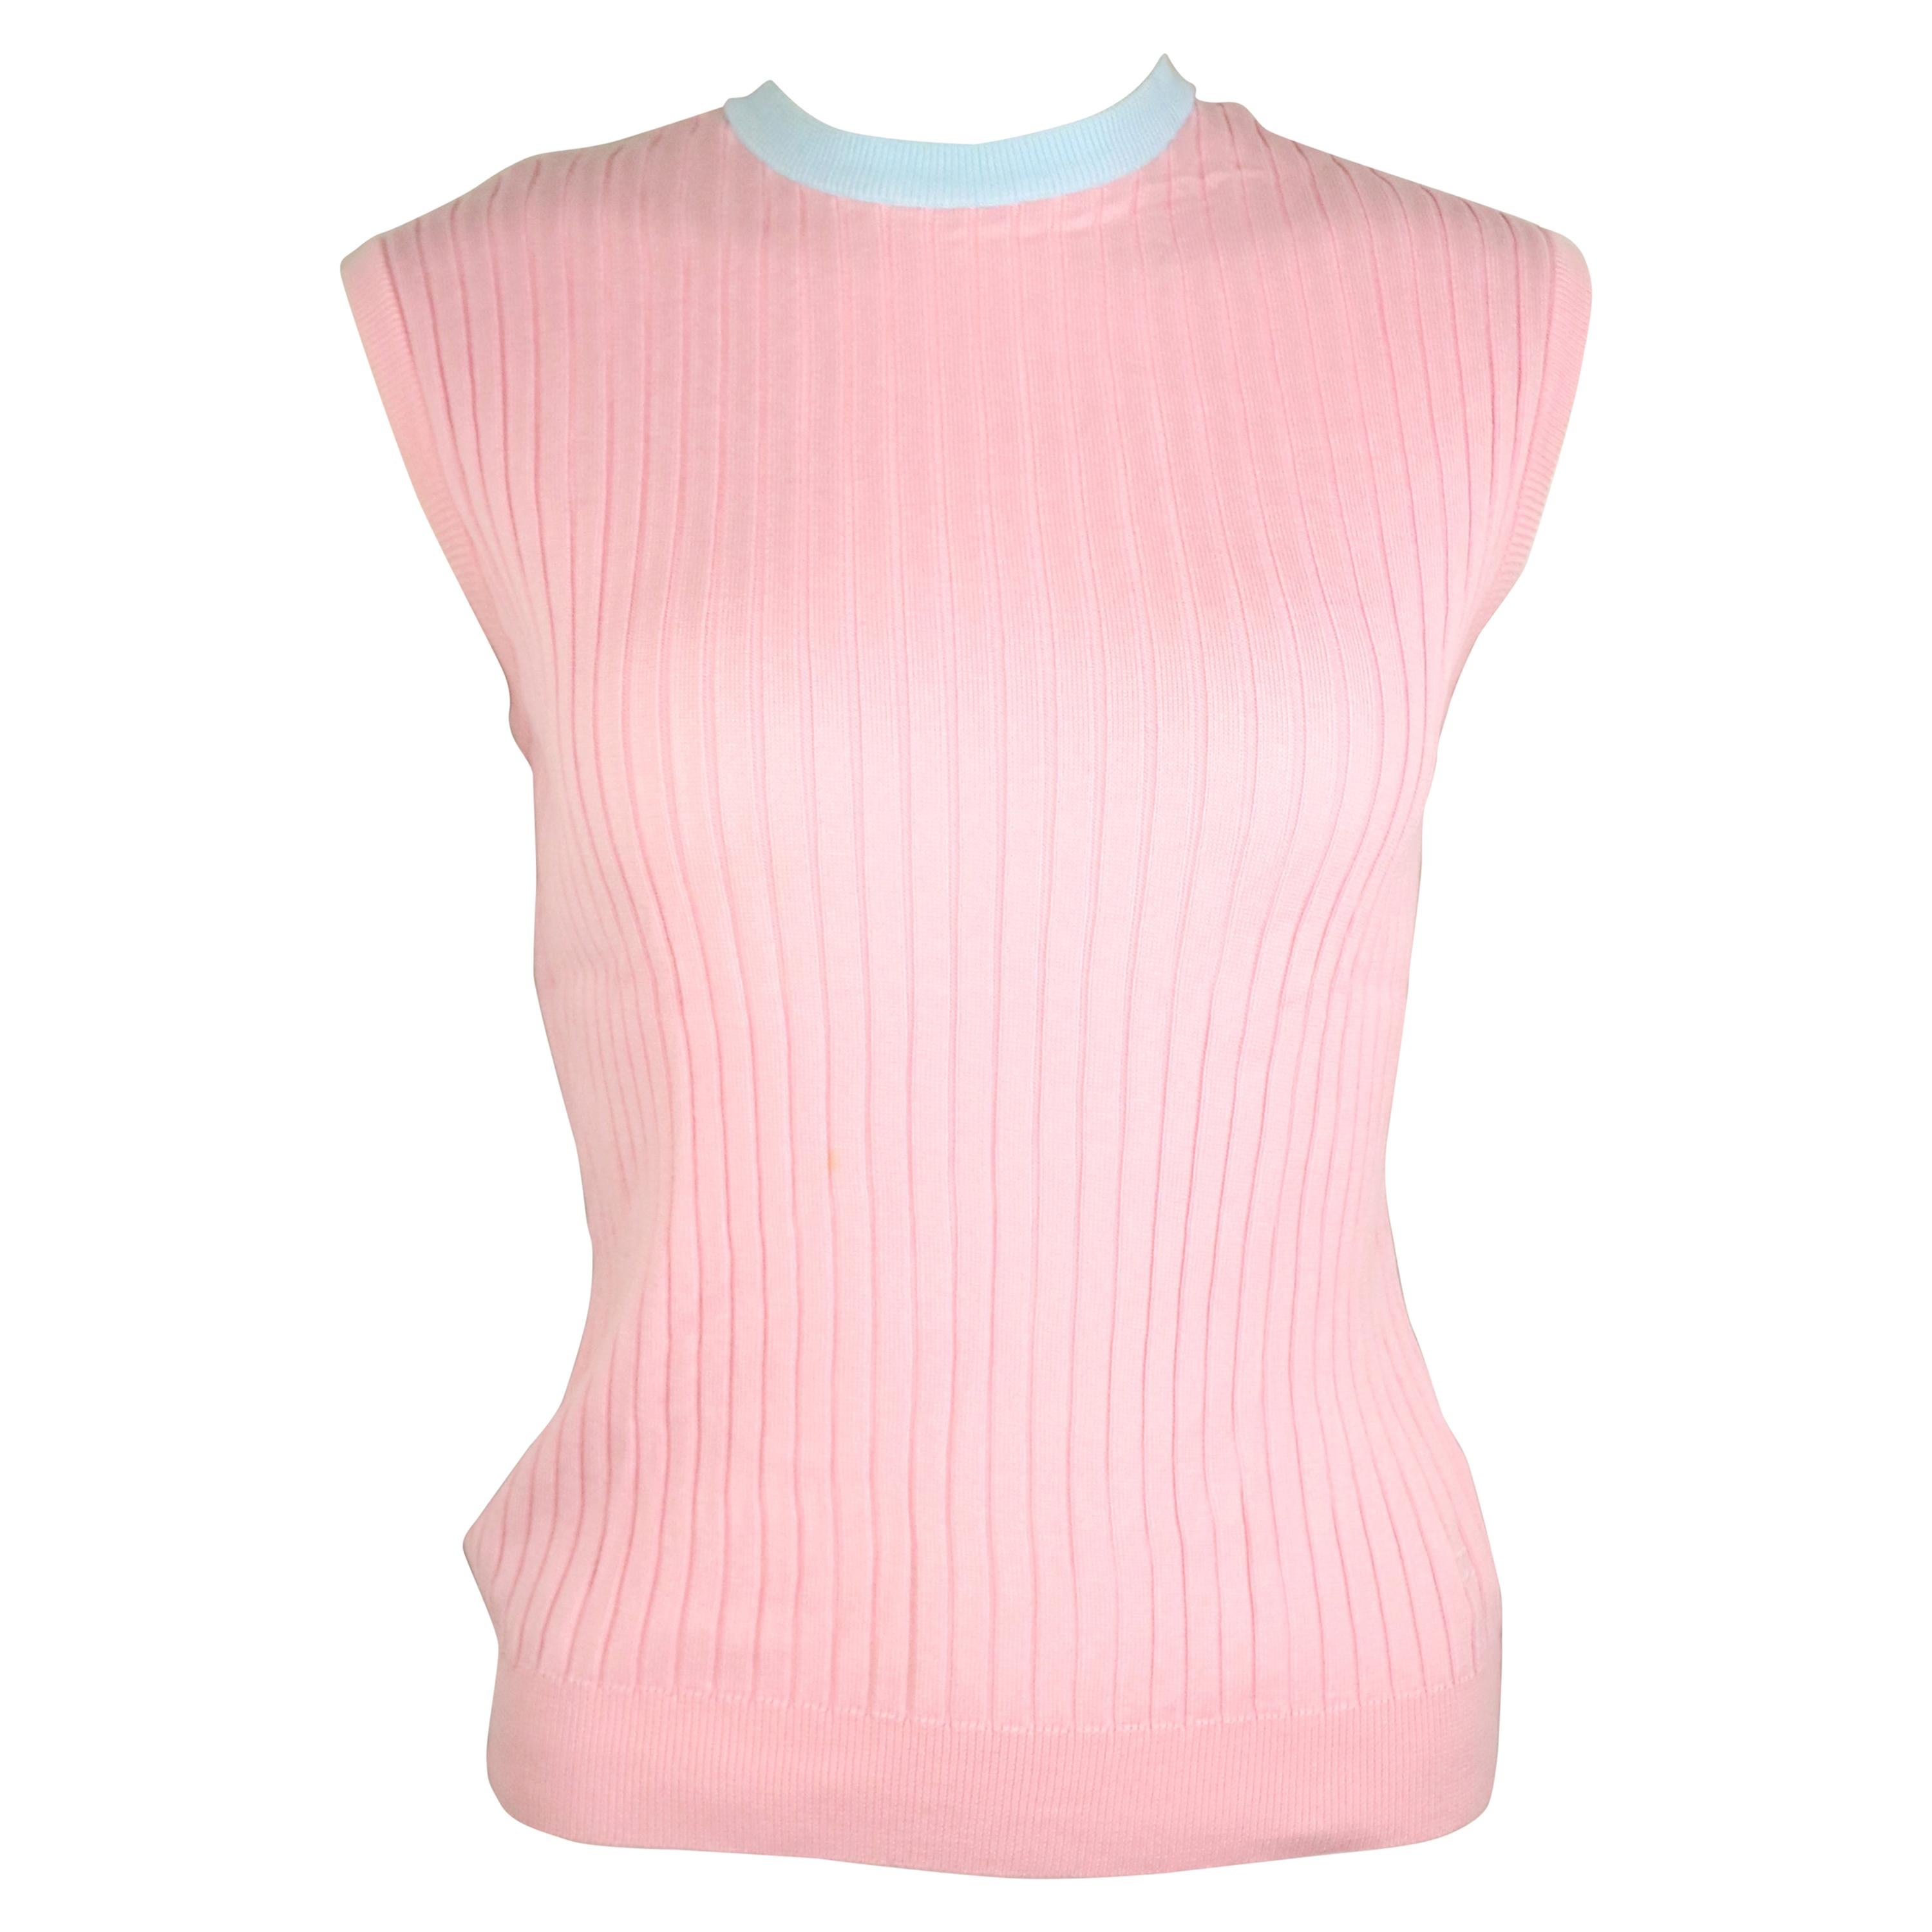 Chanel Pink and Blue Trimming Sleevesless Top